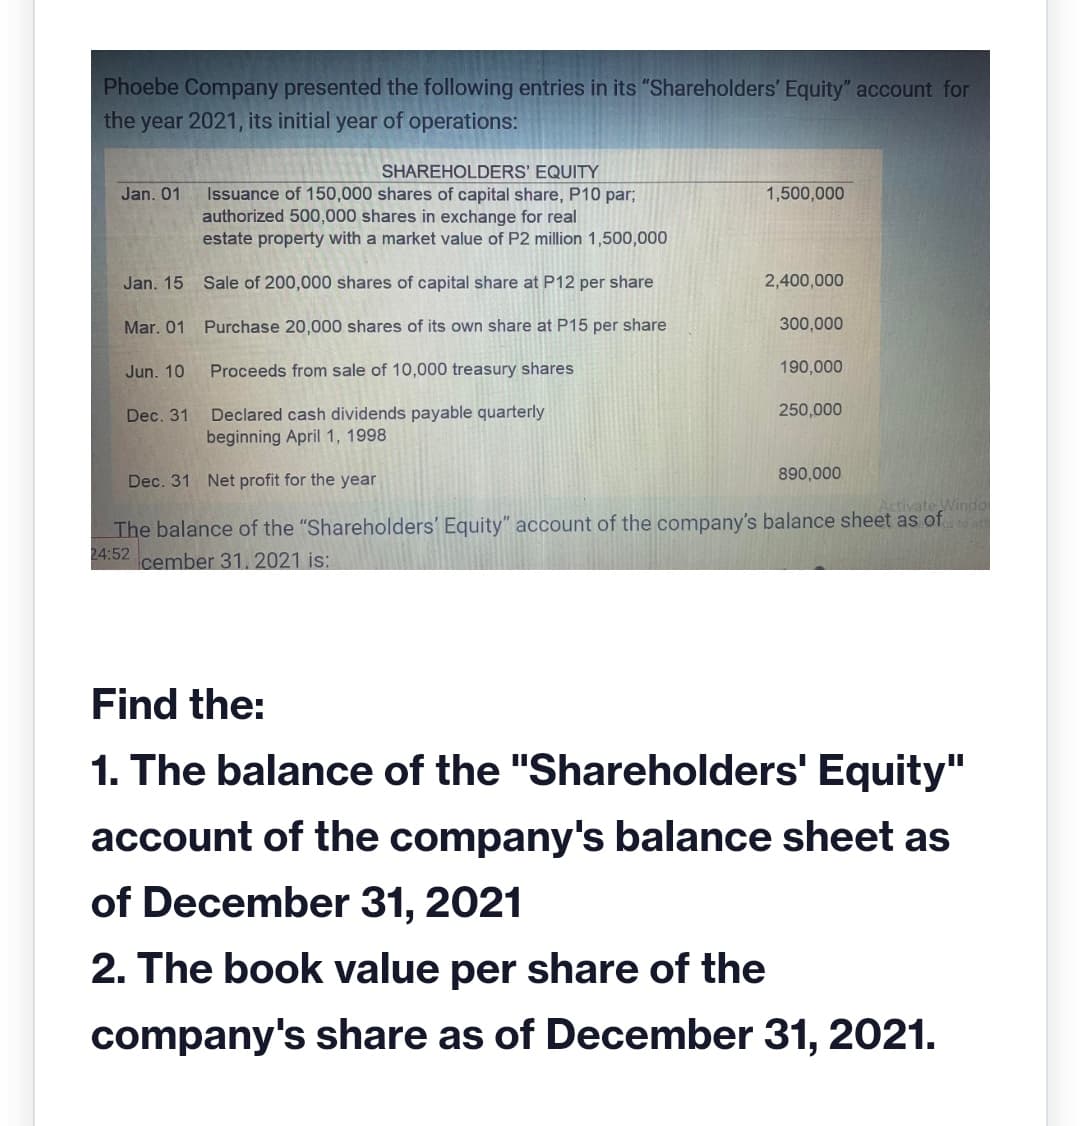 Phoebe Company presented the following entries in its "Shareholders' Equity" account for
the year 2021, its initial year of operations:
SHAREHOLDERS' EQUITY
Jan. 01
1,500,000
Issuance of 150,000 shares of capital share, P10 par;
authorized 500,000 shares in exchange for real
estate property with a market value of P2 million 1,500,000
Jan. 15
Sale of 200,000 shares of capital share at P12 per share
2,400,000
Mar. 01 Purchase 20,000 shares of its own share at P15 per share
300,000
Jun. 10
Proceeds from sale of 10,000 treasury shares
190,000
Dec. 31
250,000
Declared cash dividends payable quarterly
beginning April 1, 1998
Dec. 31 Net profit for the year
890,000
Activate Windo
The balance of the "Shareholders' Equity" account of the company's balance sheet as of
24:52 cember 31, 2021 is:
Find the:
1. The balance of the "Shareholders' Equity"
account of the company's balance sheet as
of December 31, 2021
2. The book value per share of the
company's share as of December 31, 2021.